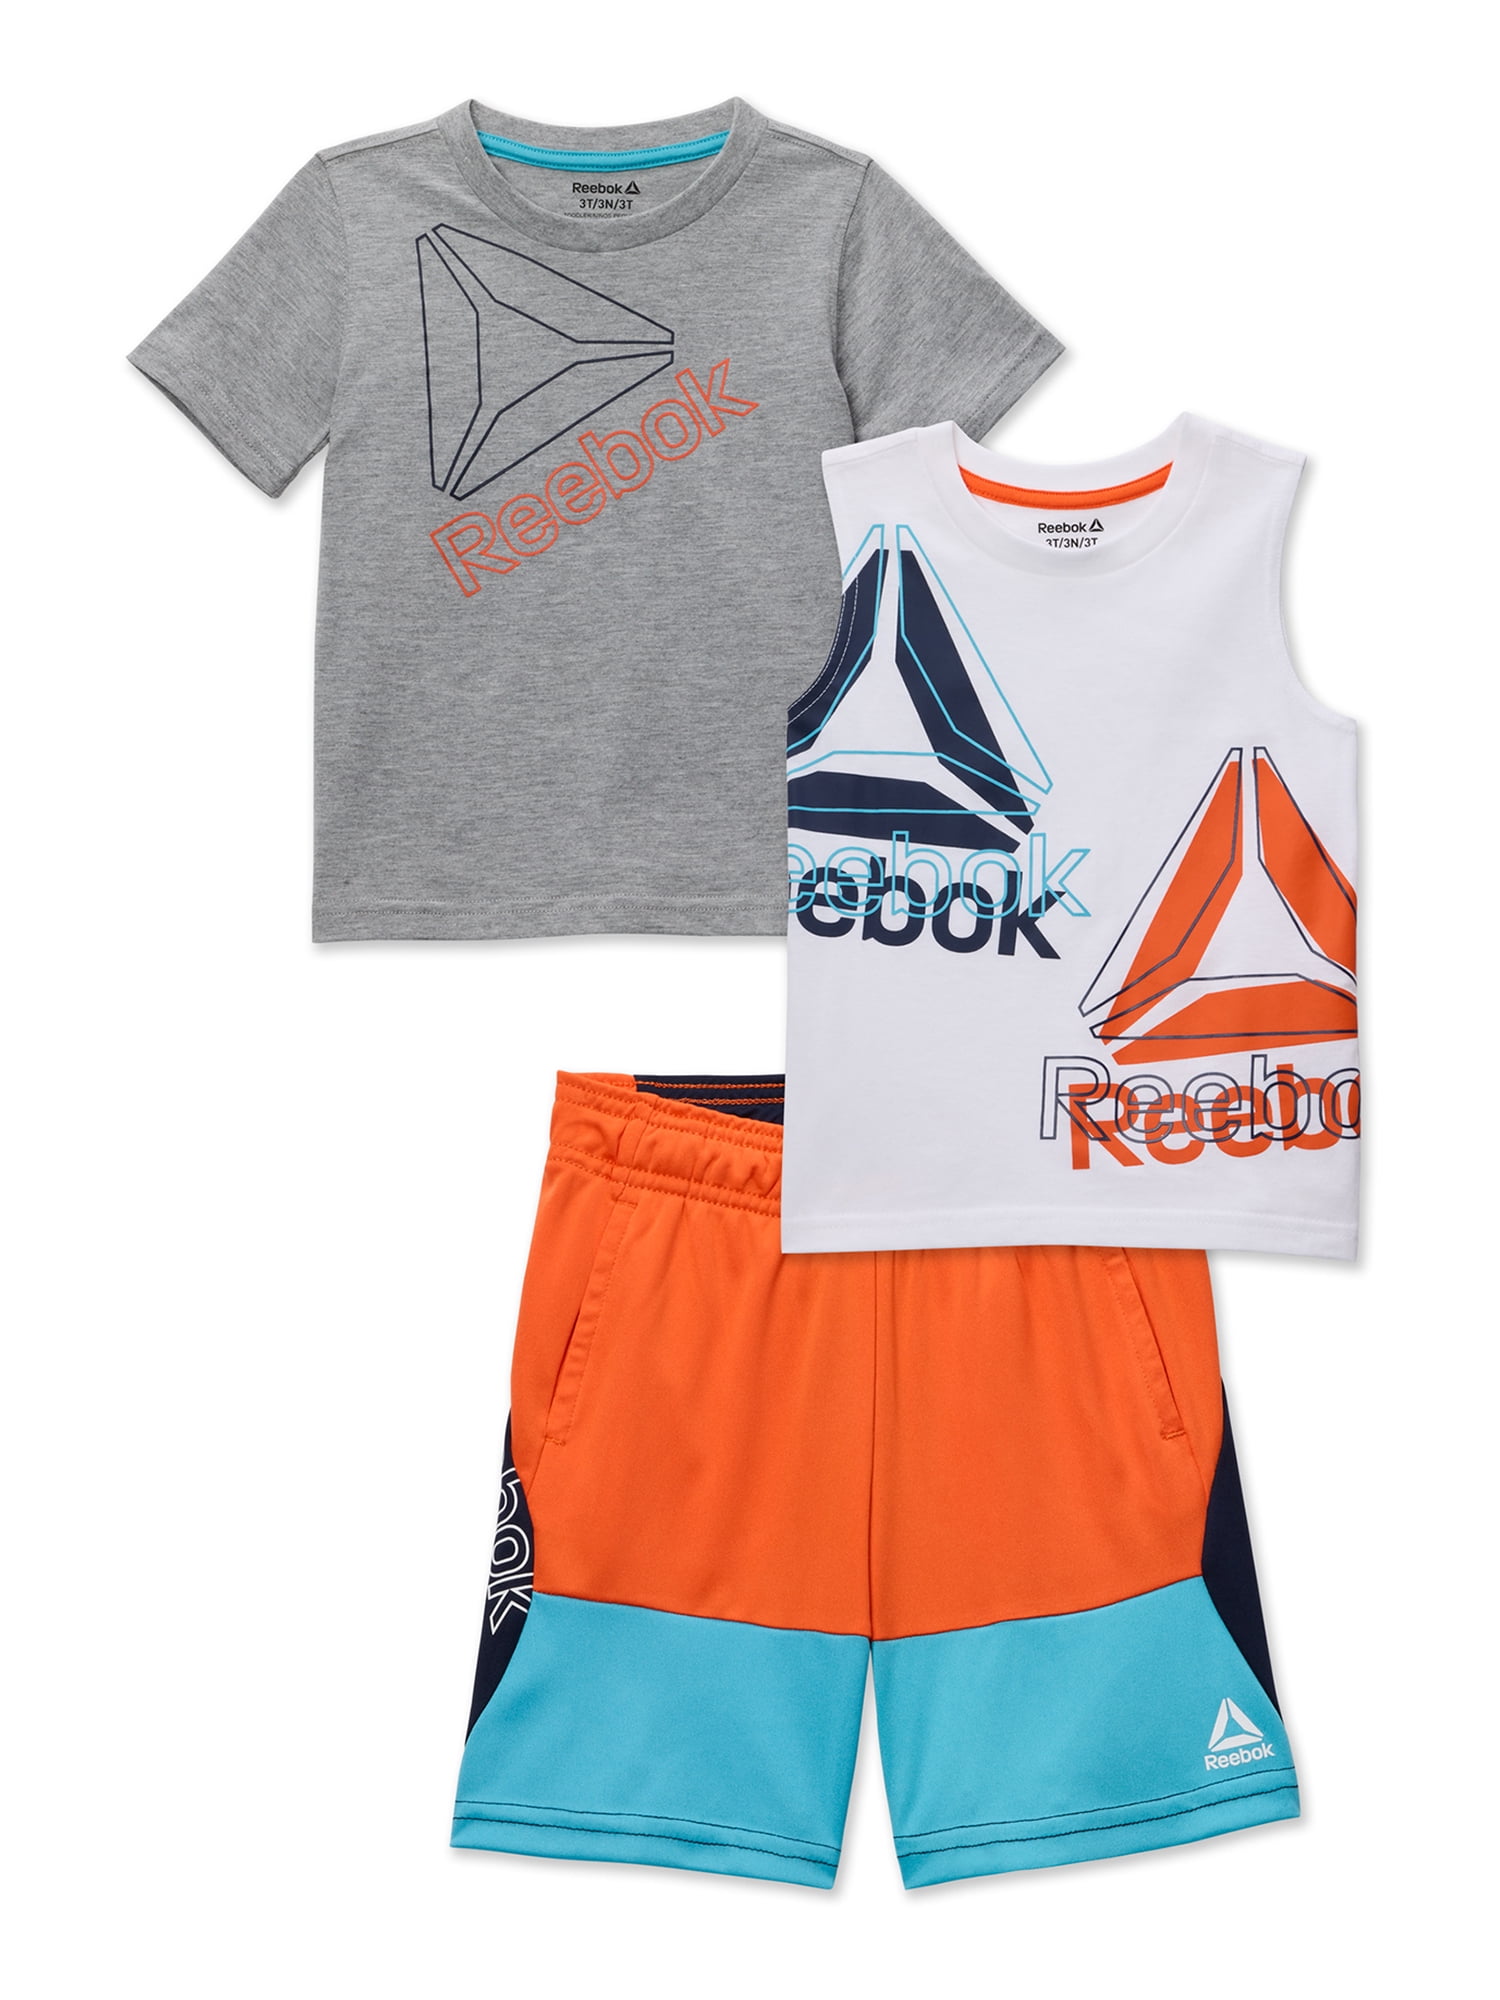 Muf Cilia kleermaker Reebok Baby and Toddler Boy T-Shirt, Muscle Tank, and Shorts Outfit Set,  3-Piece, Sizes 12M-5T - Walmart.com